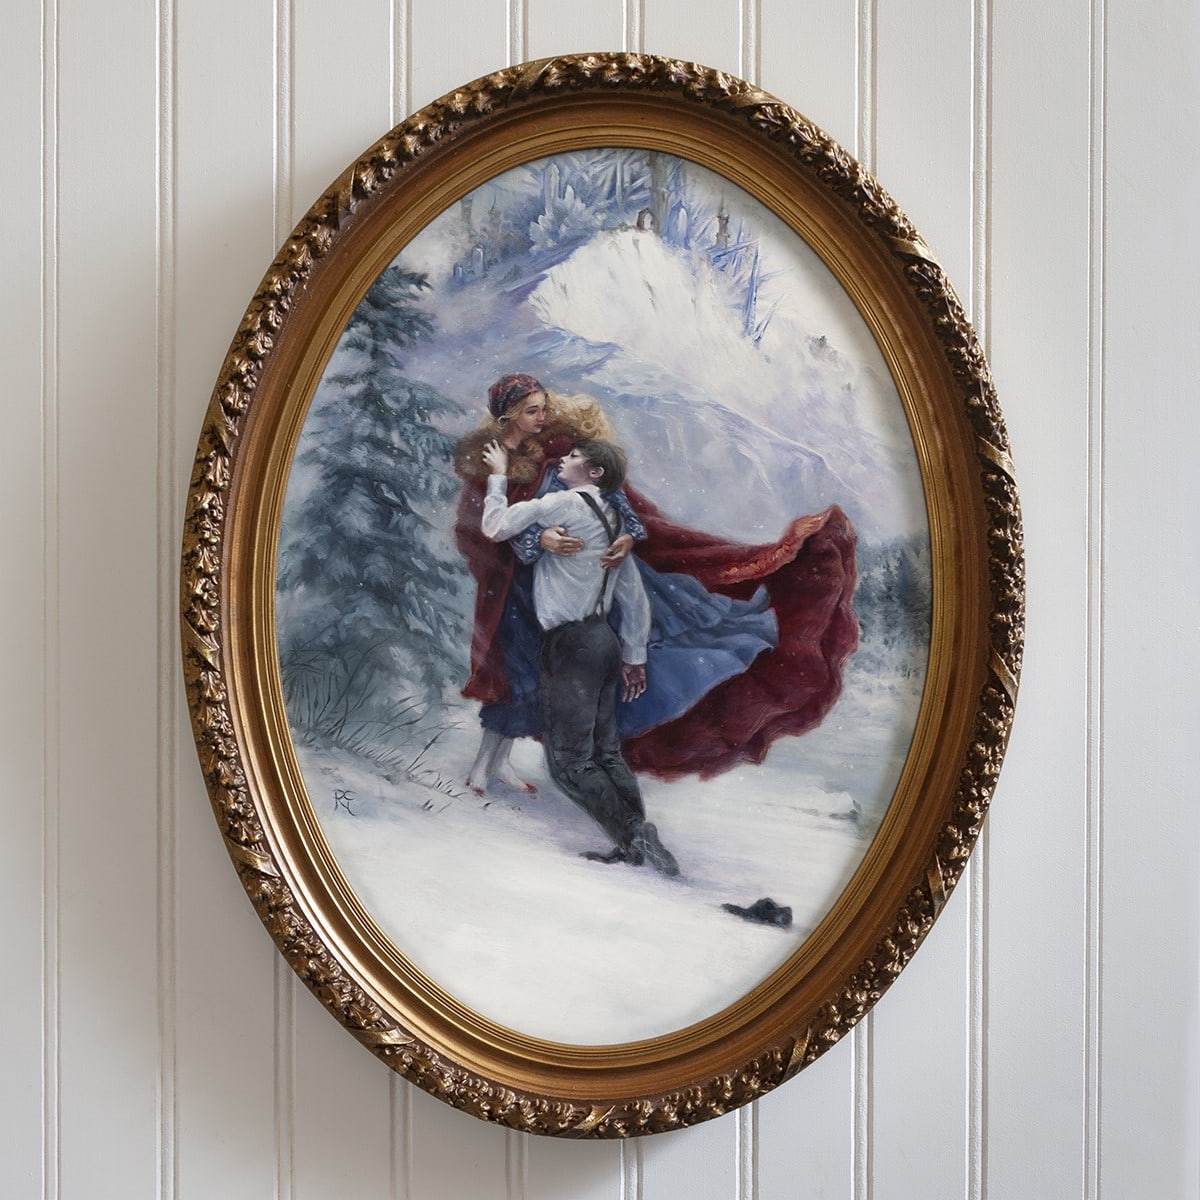 Kai & Gerda (The Snow Queen) from the collection of Erica Berkowitz |  Artwork Archive